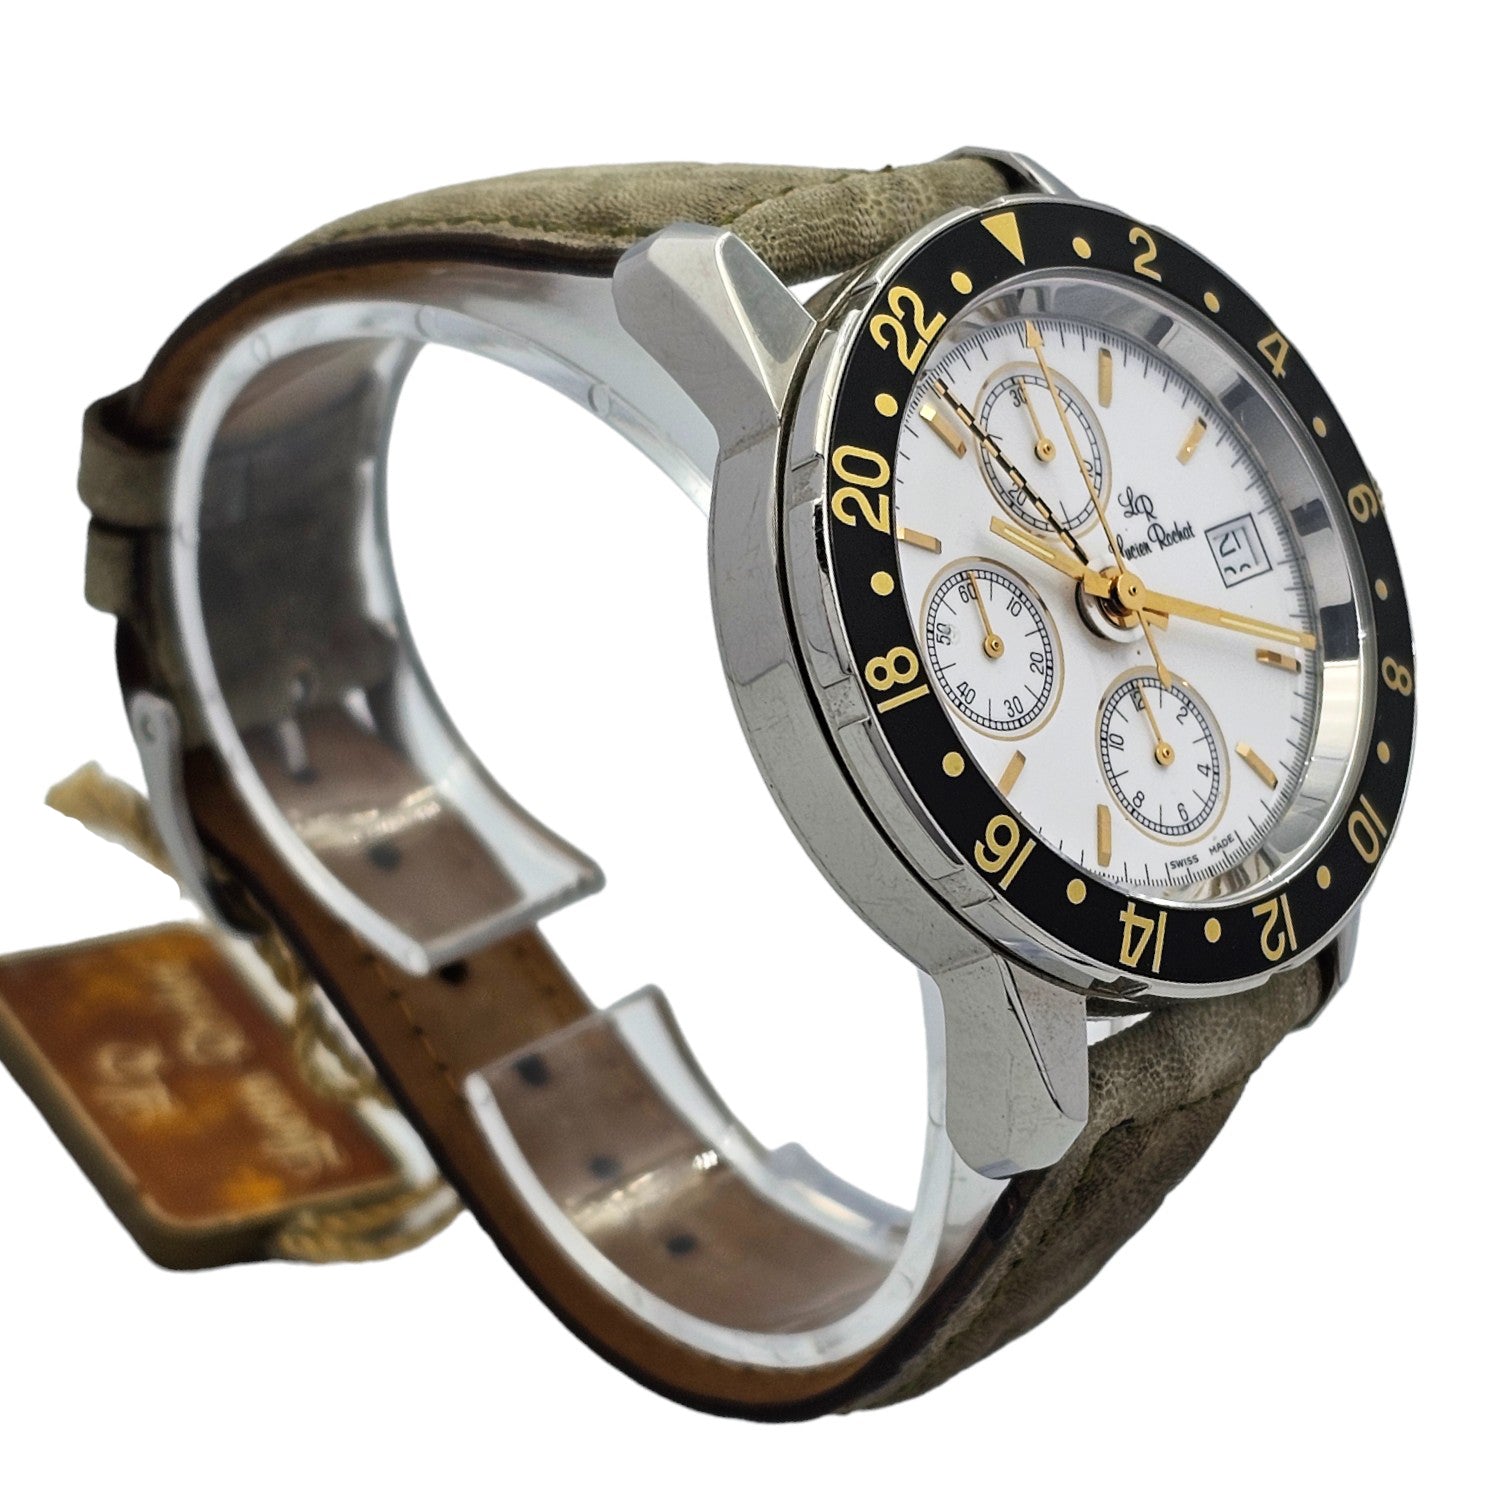 Lucien Rochat Royal Army Gmt Chrono Ref. 21.413.037 - ON6338